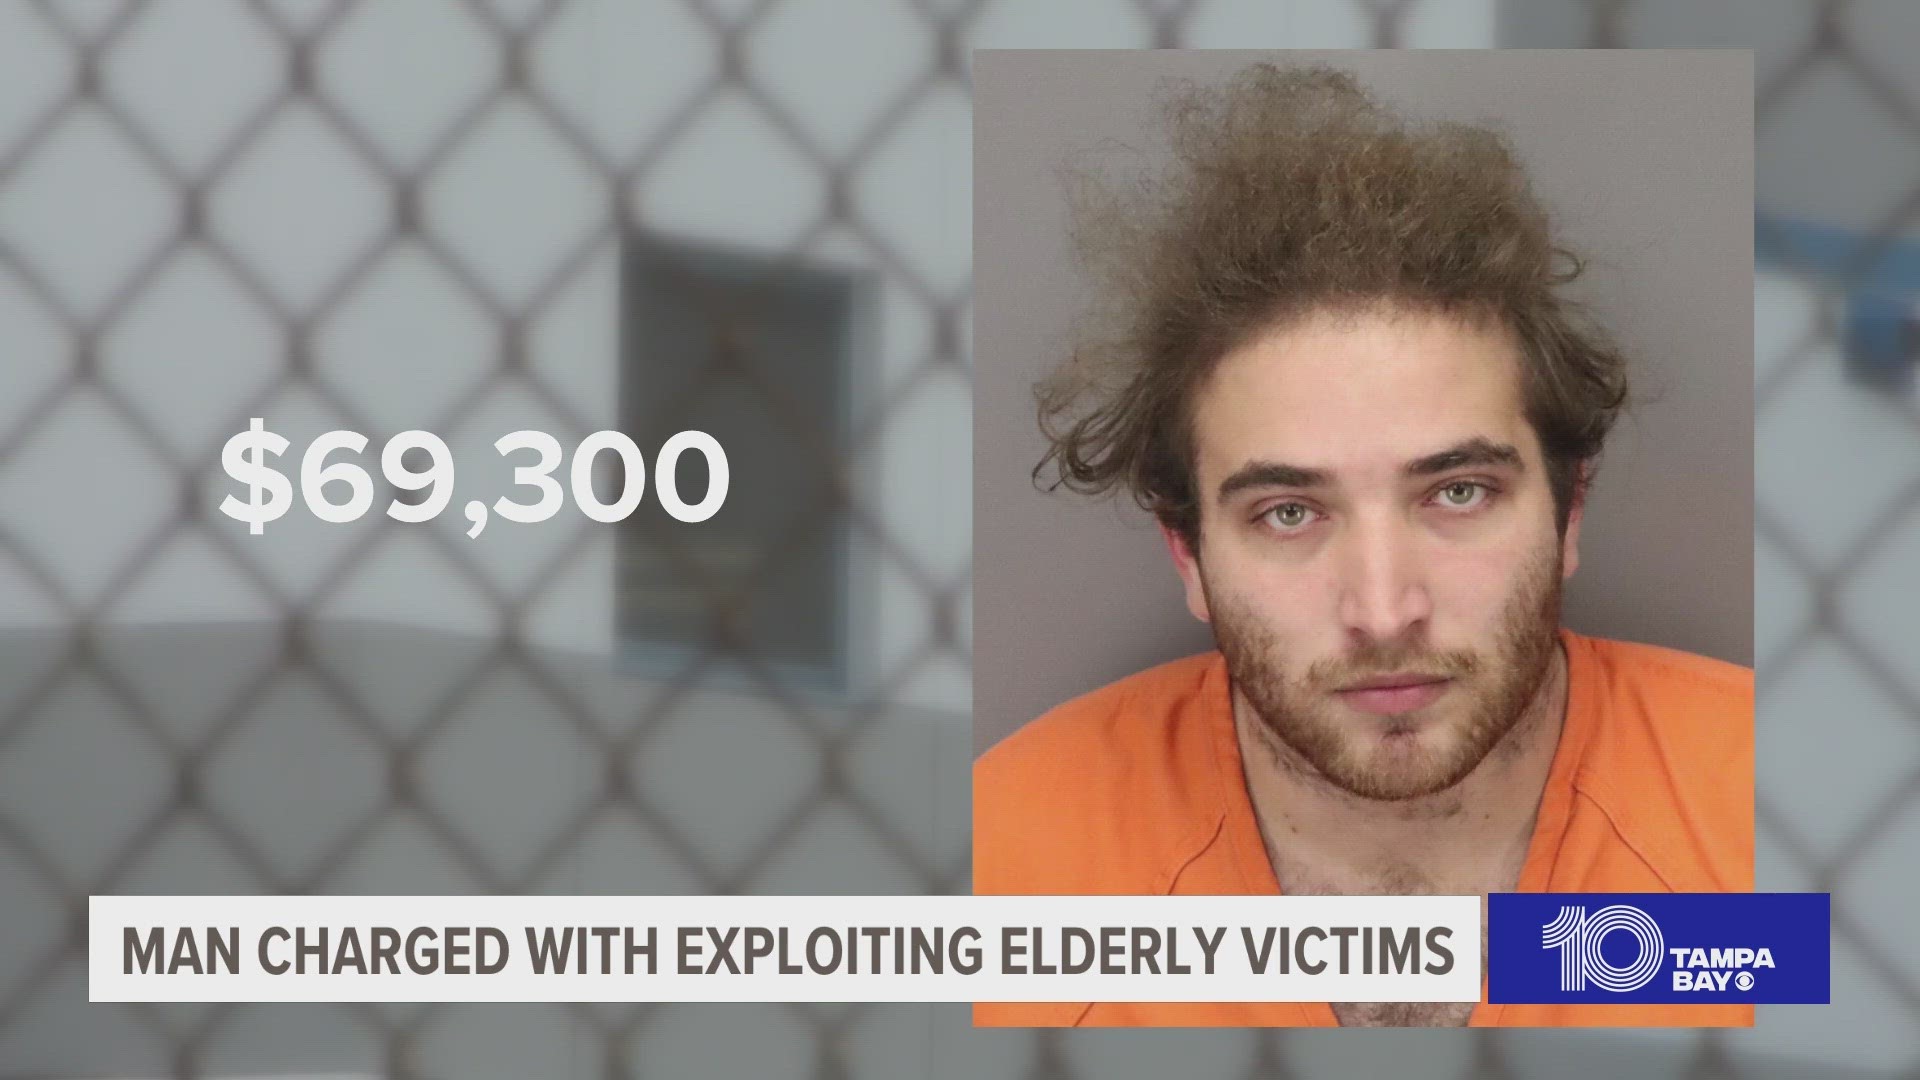 Scott Newmark, 26, is accused of stealing nearly $70,000 from two elderly or disabled adults he was close to, officials said.